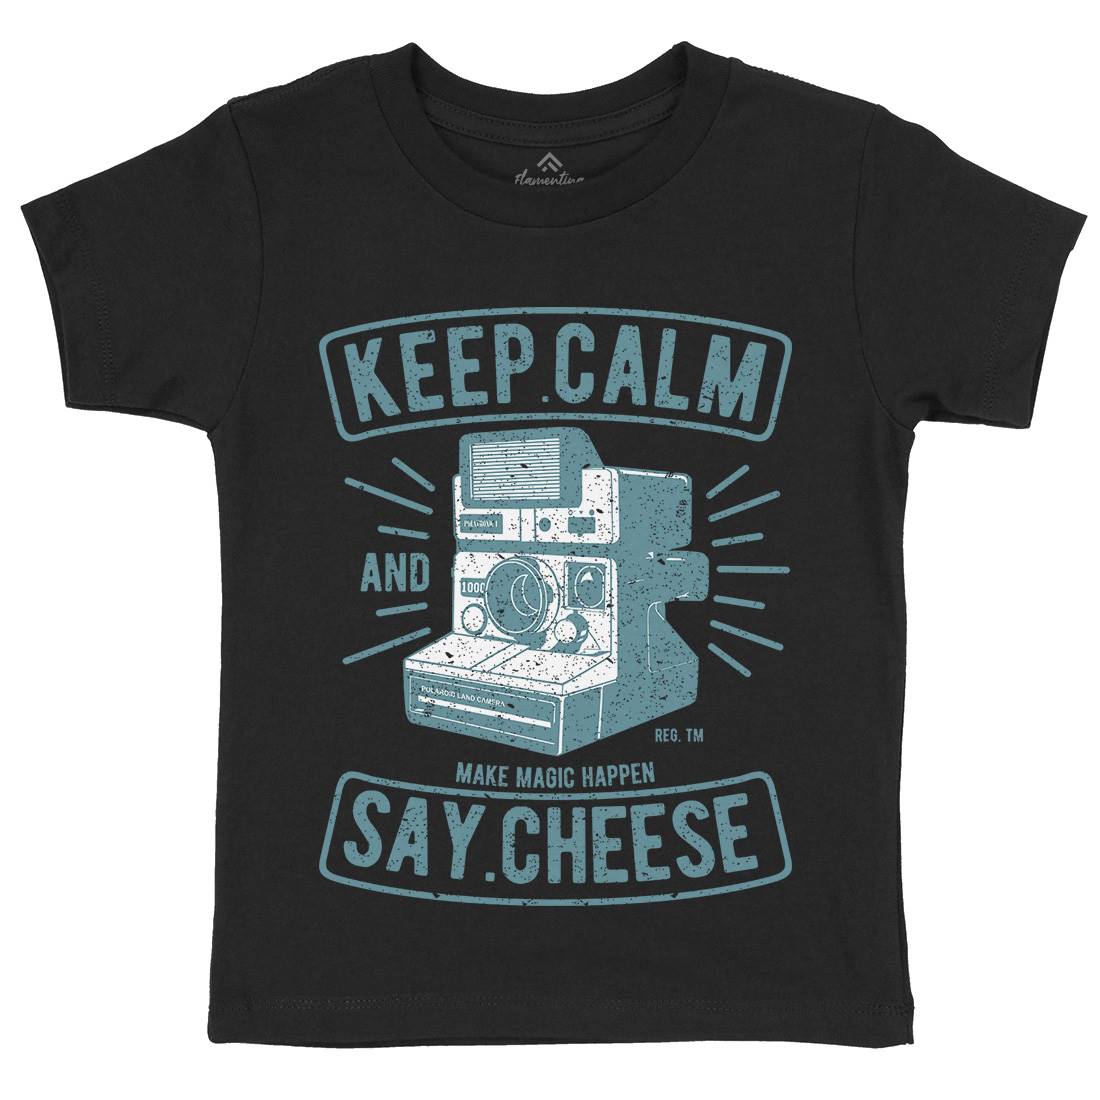 Keep Calm And Say Cheese Kids Organic Crew Neck T-Shirt Media A699